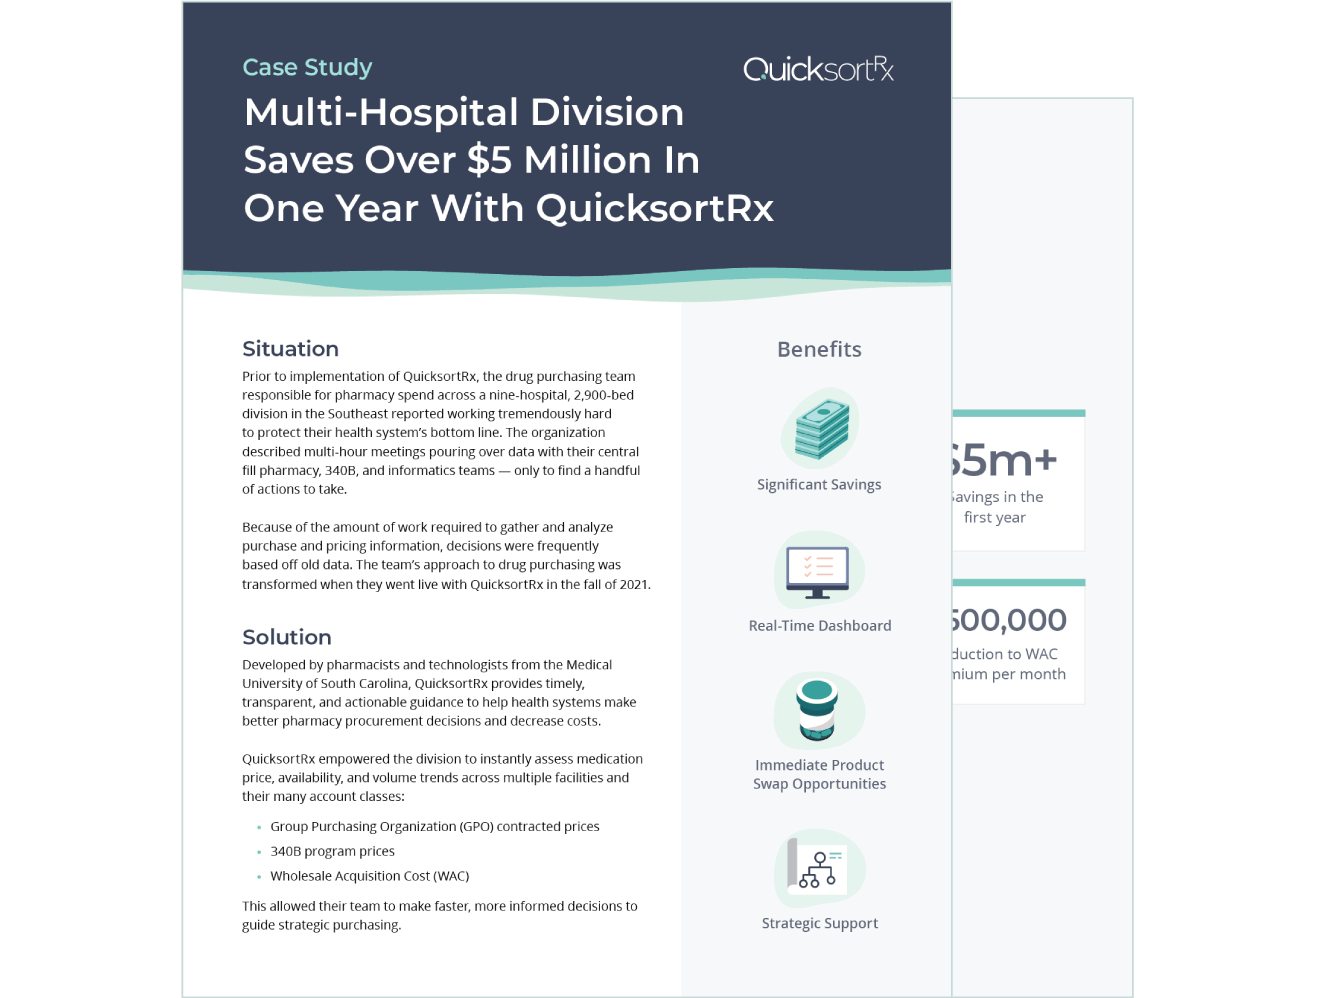 Multi-Hospital Division Saves Over $5 Million in One Year with QuicksortRx